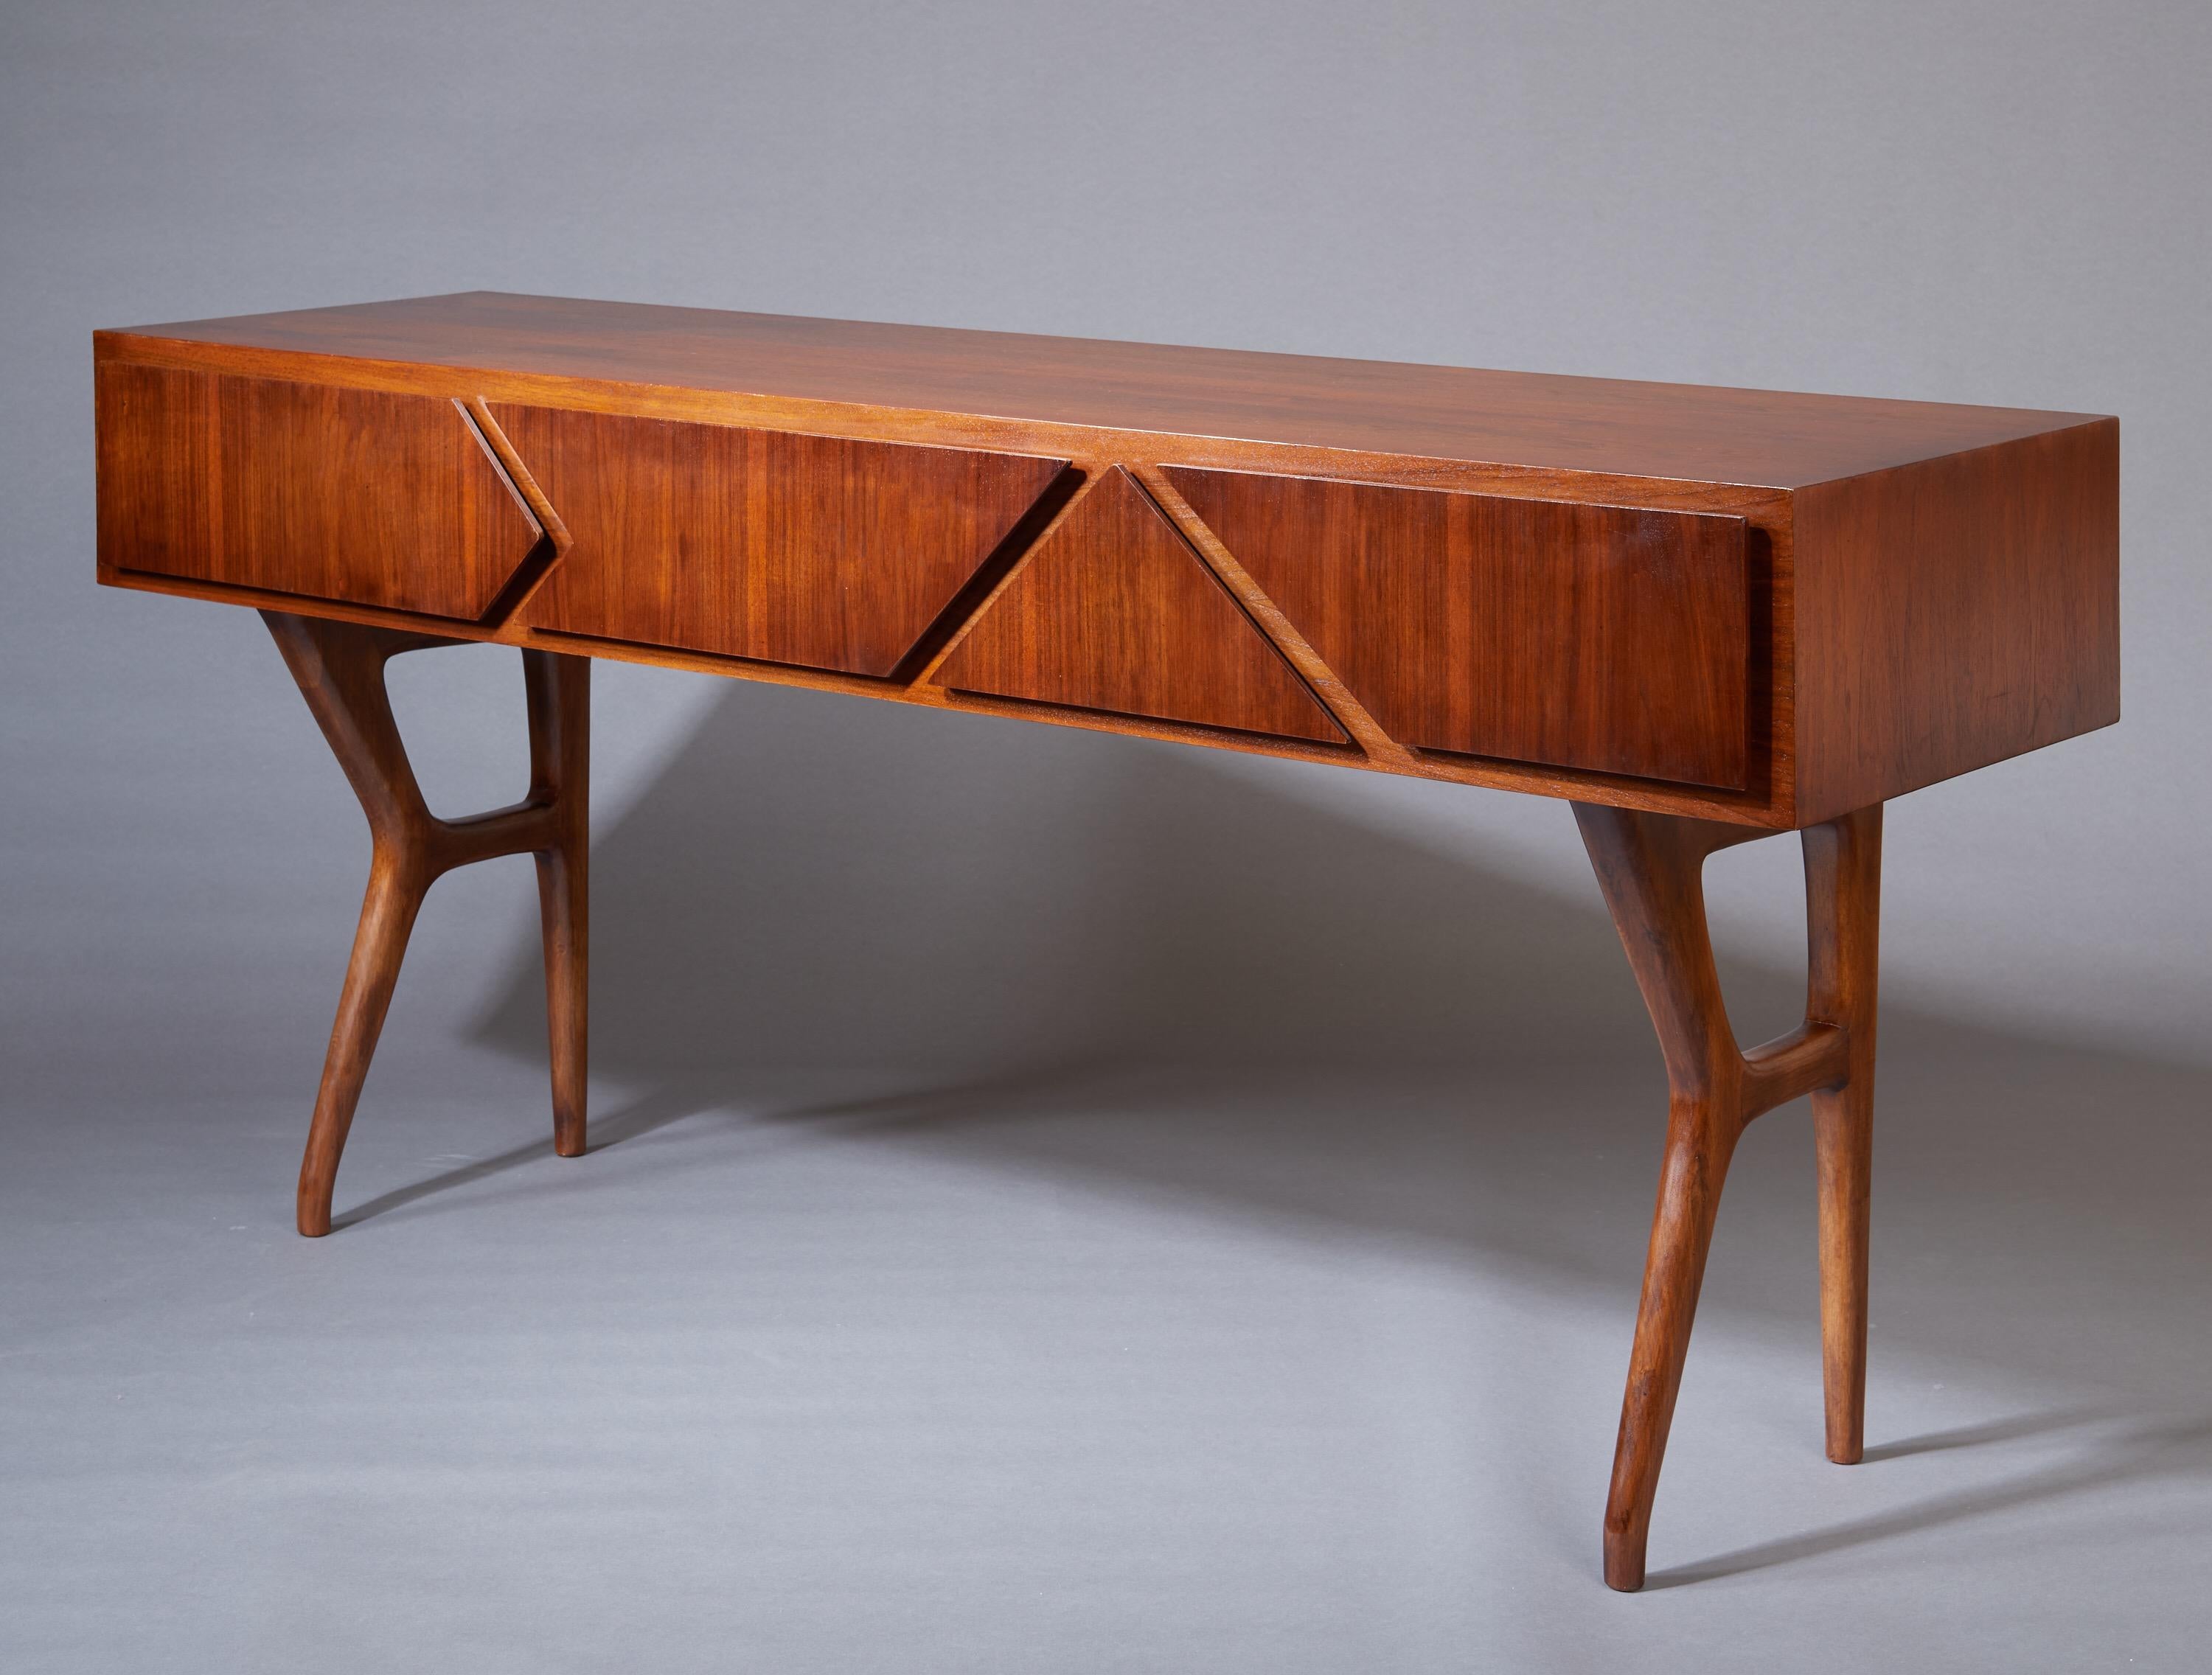 Melchiorre Bega (1898-1976)

A large and important console by Bolognese architect and designer Melchiorre Bega, in polished walnut. The elongated rectangular top, enhanced by a beautiful tactile grain and precise craftsmanship, features four